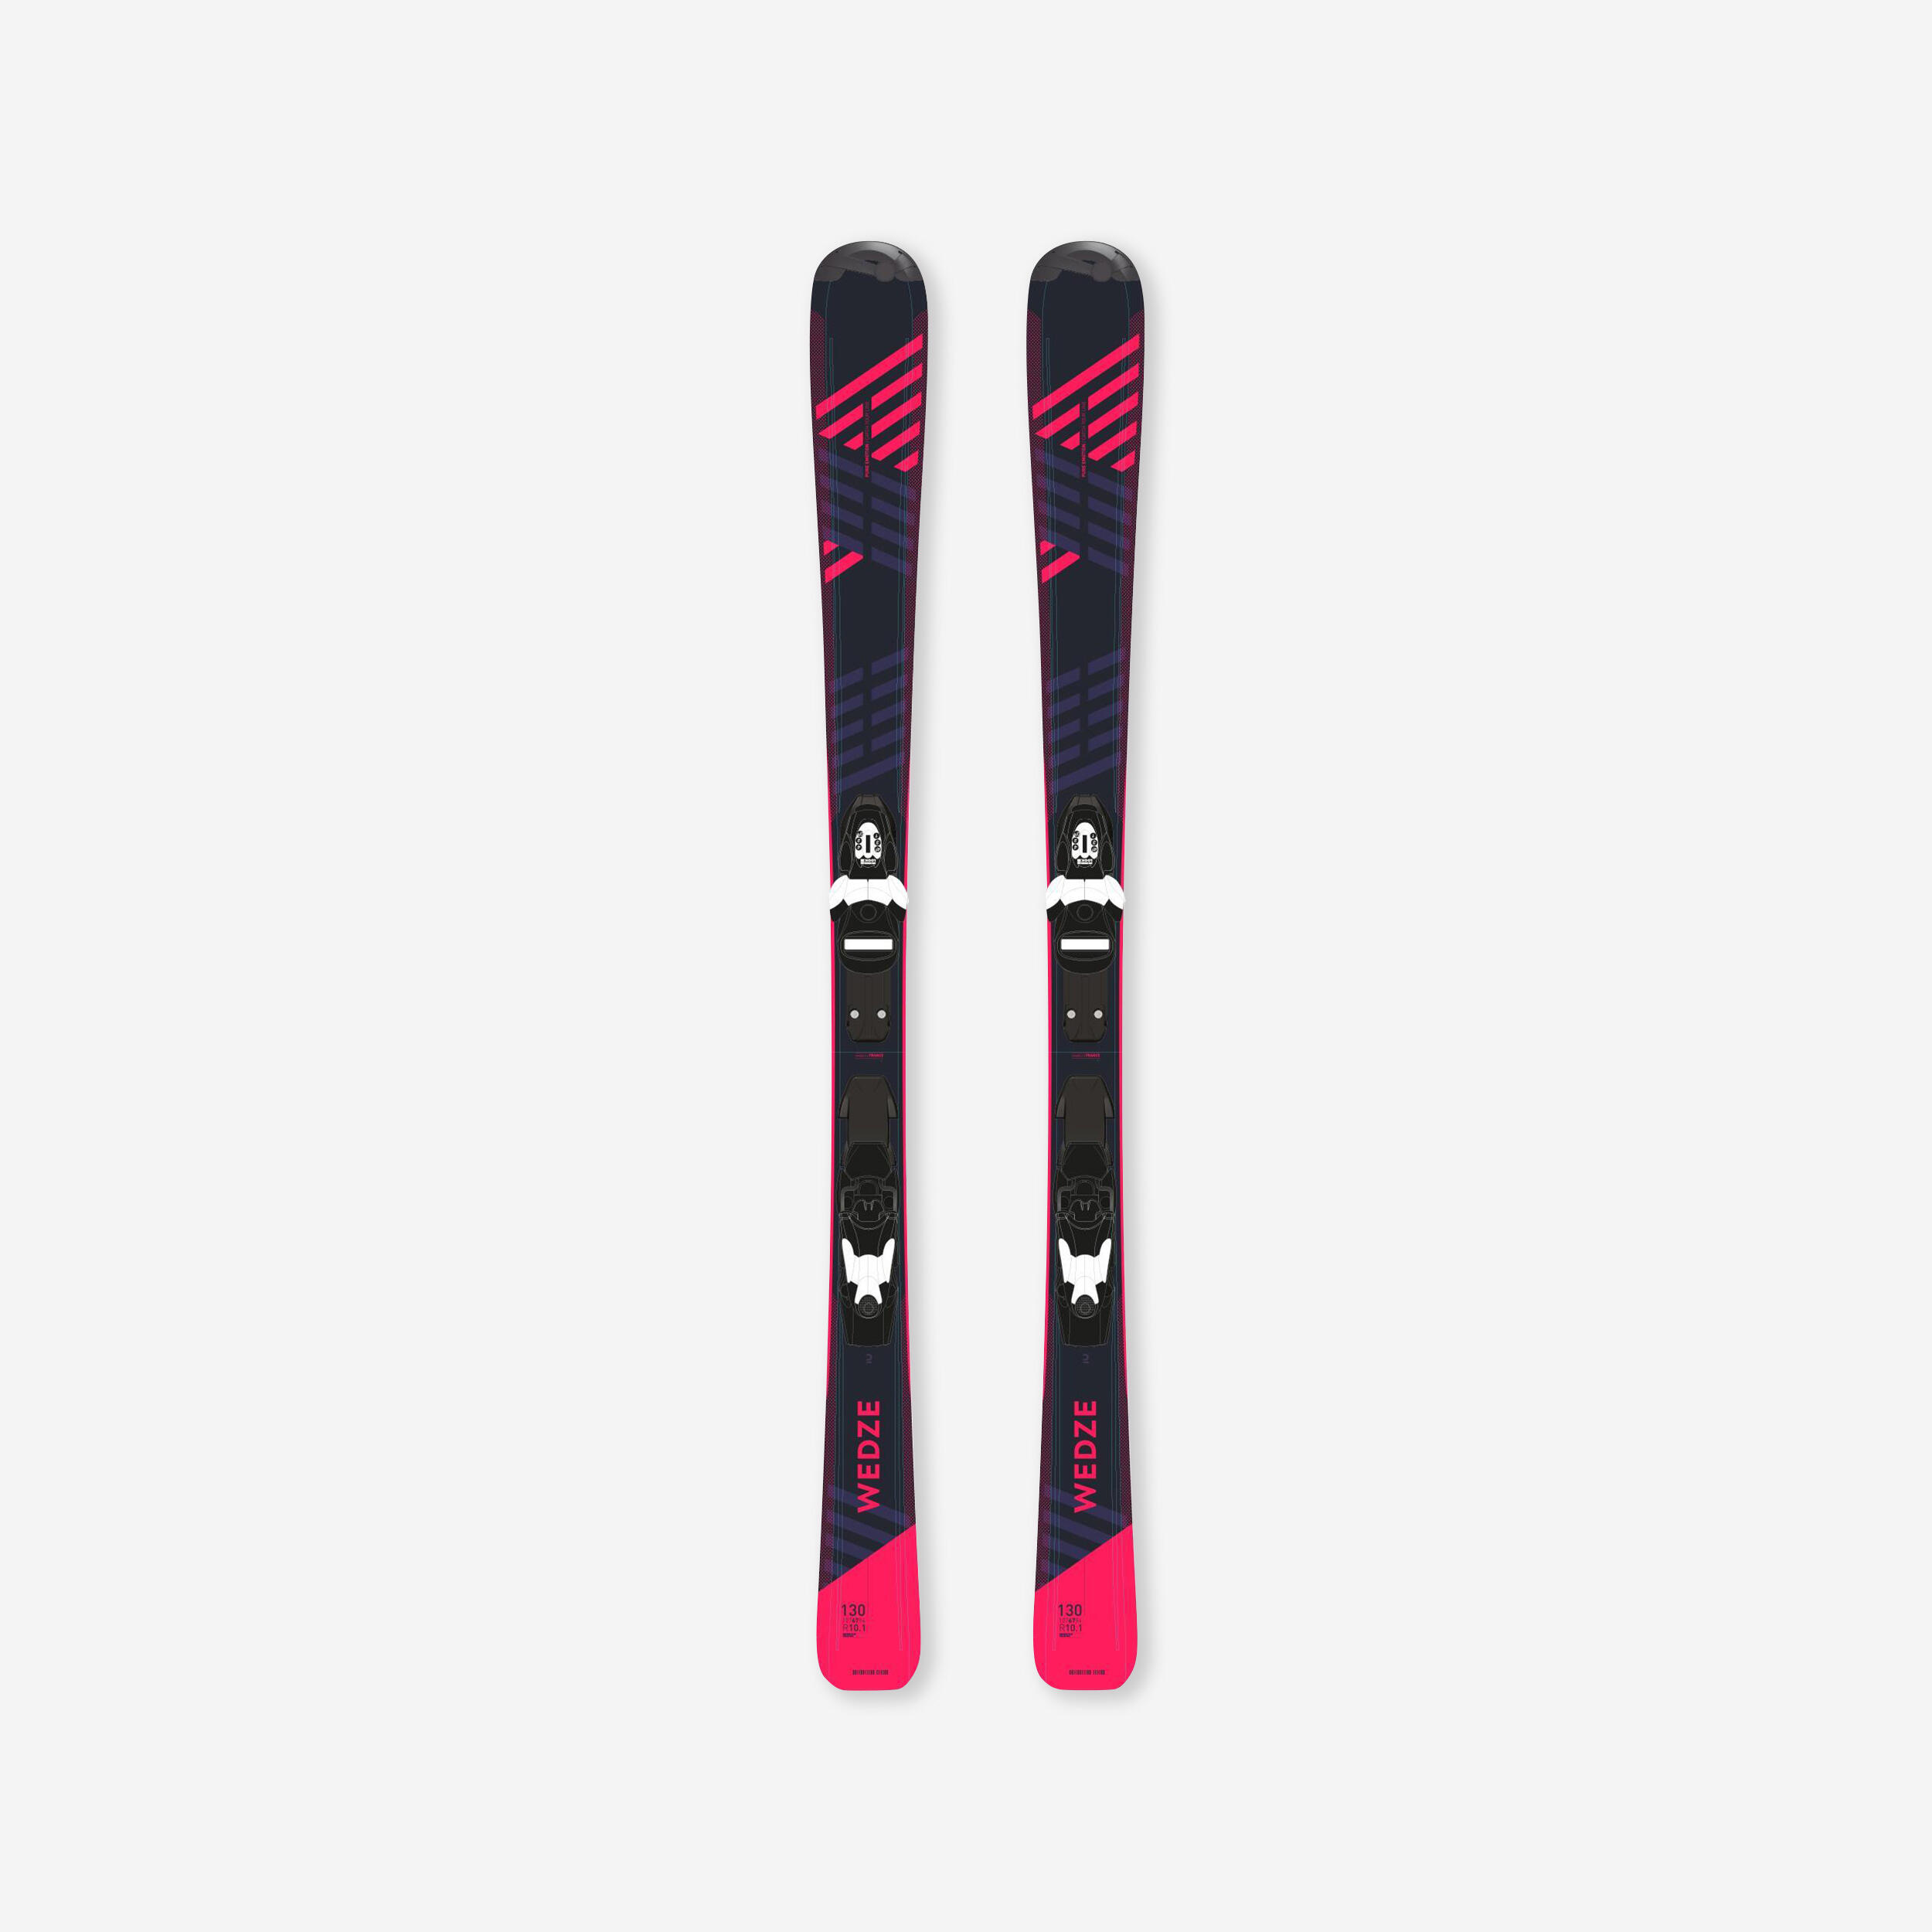 WEDZE WOMEN’S DOWNHILL SKIS WITH BINDING - BOOST 500 - BLUE/PINK